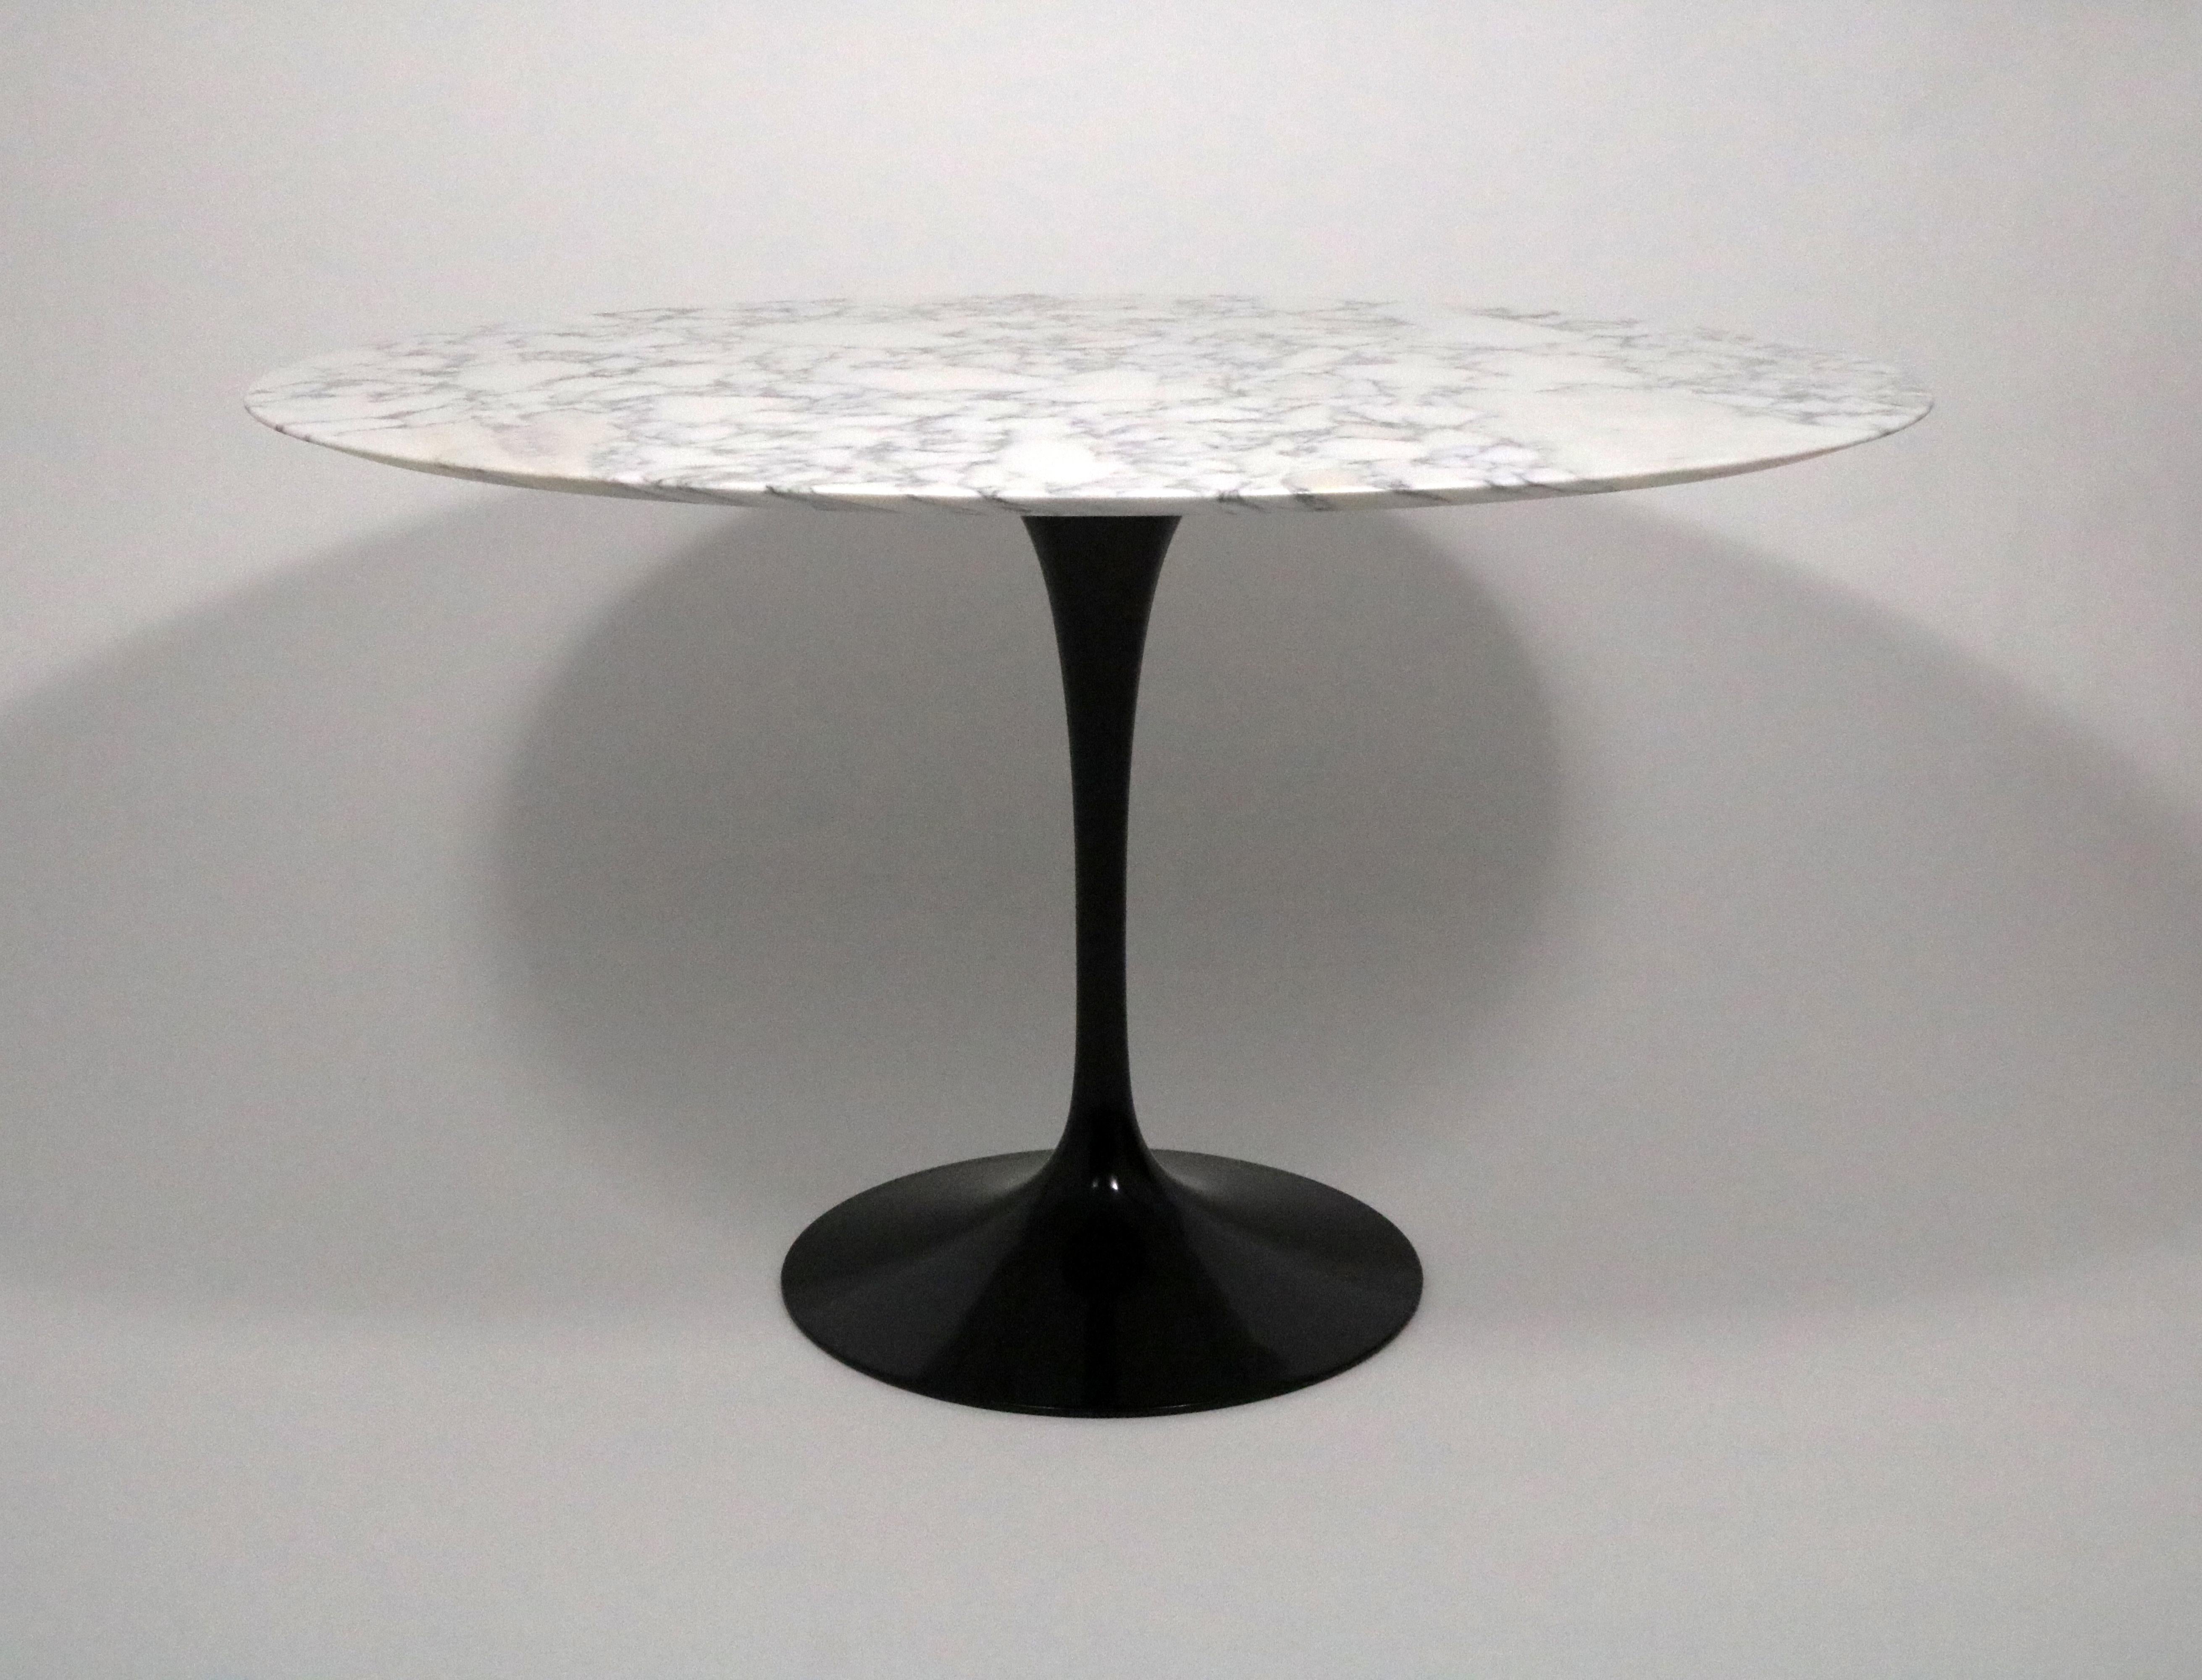 A strikingly beautiful classic with a satin-finish ivory white arebescato marble top with dark grey veining and occasional subtle color variations natural to the stone on a cast-aluminum tulip pedestal base. 

This is an authentic Knoll edition of